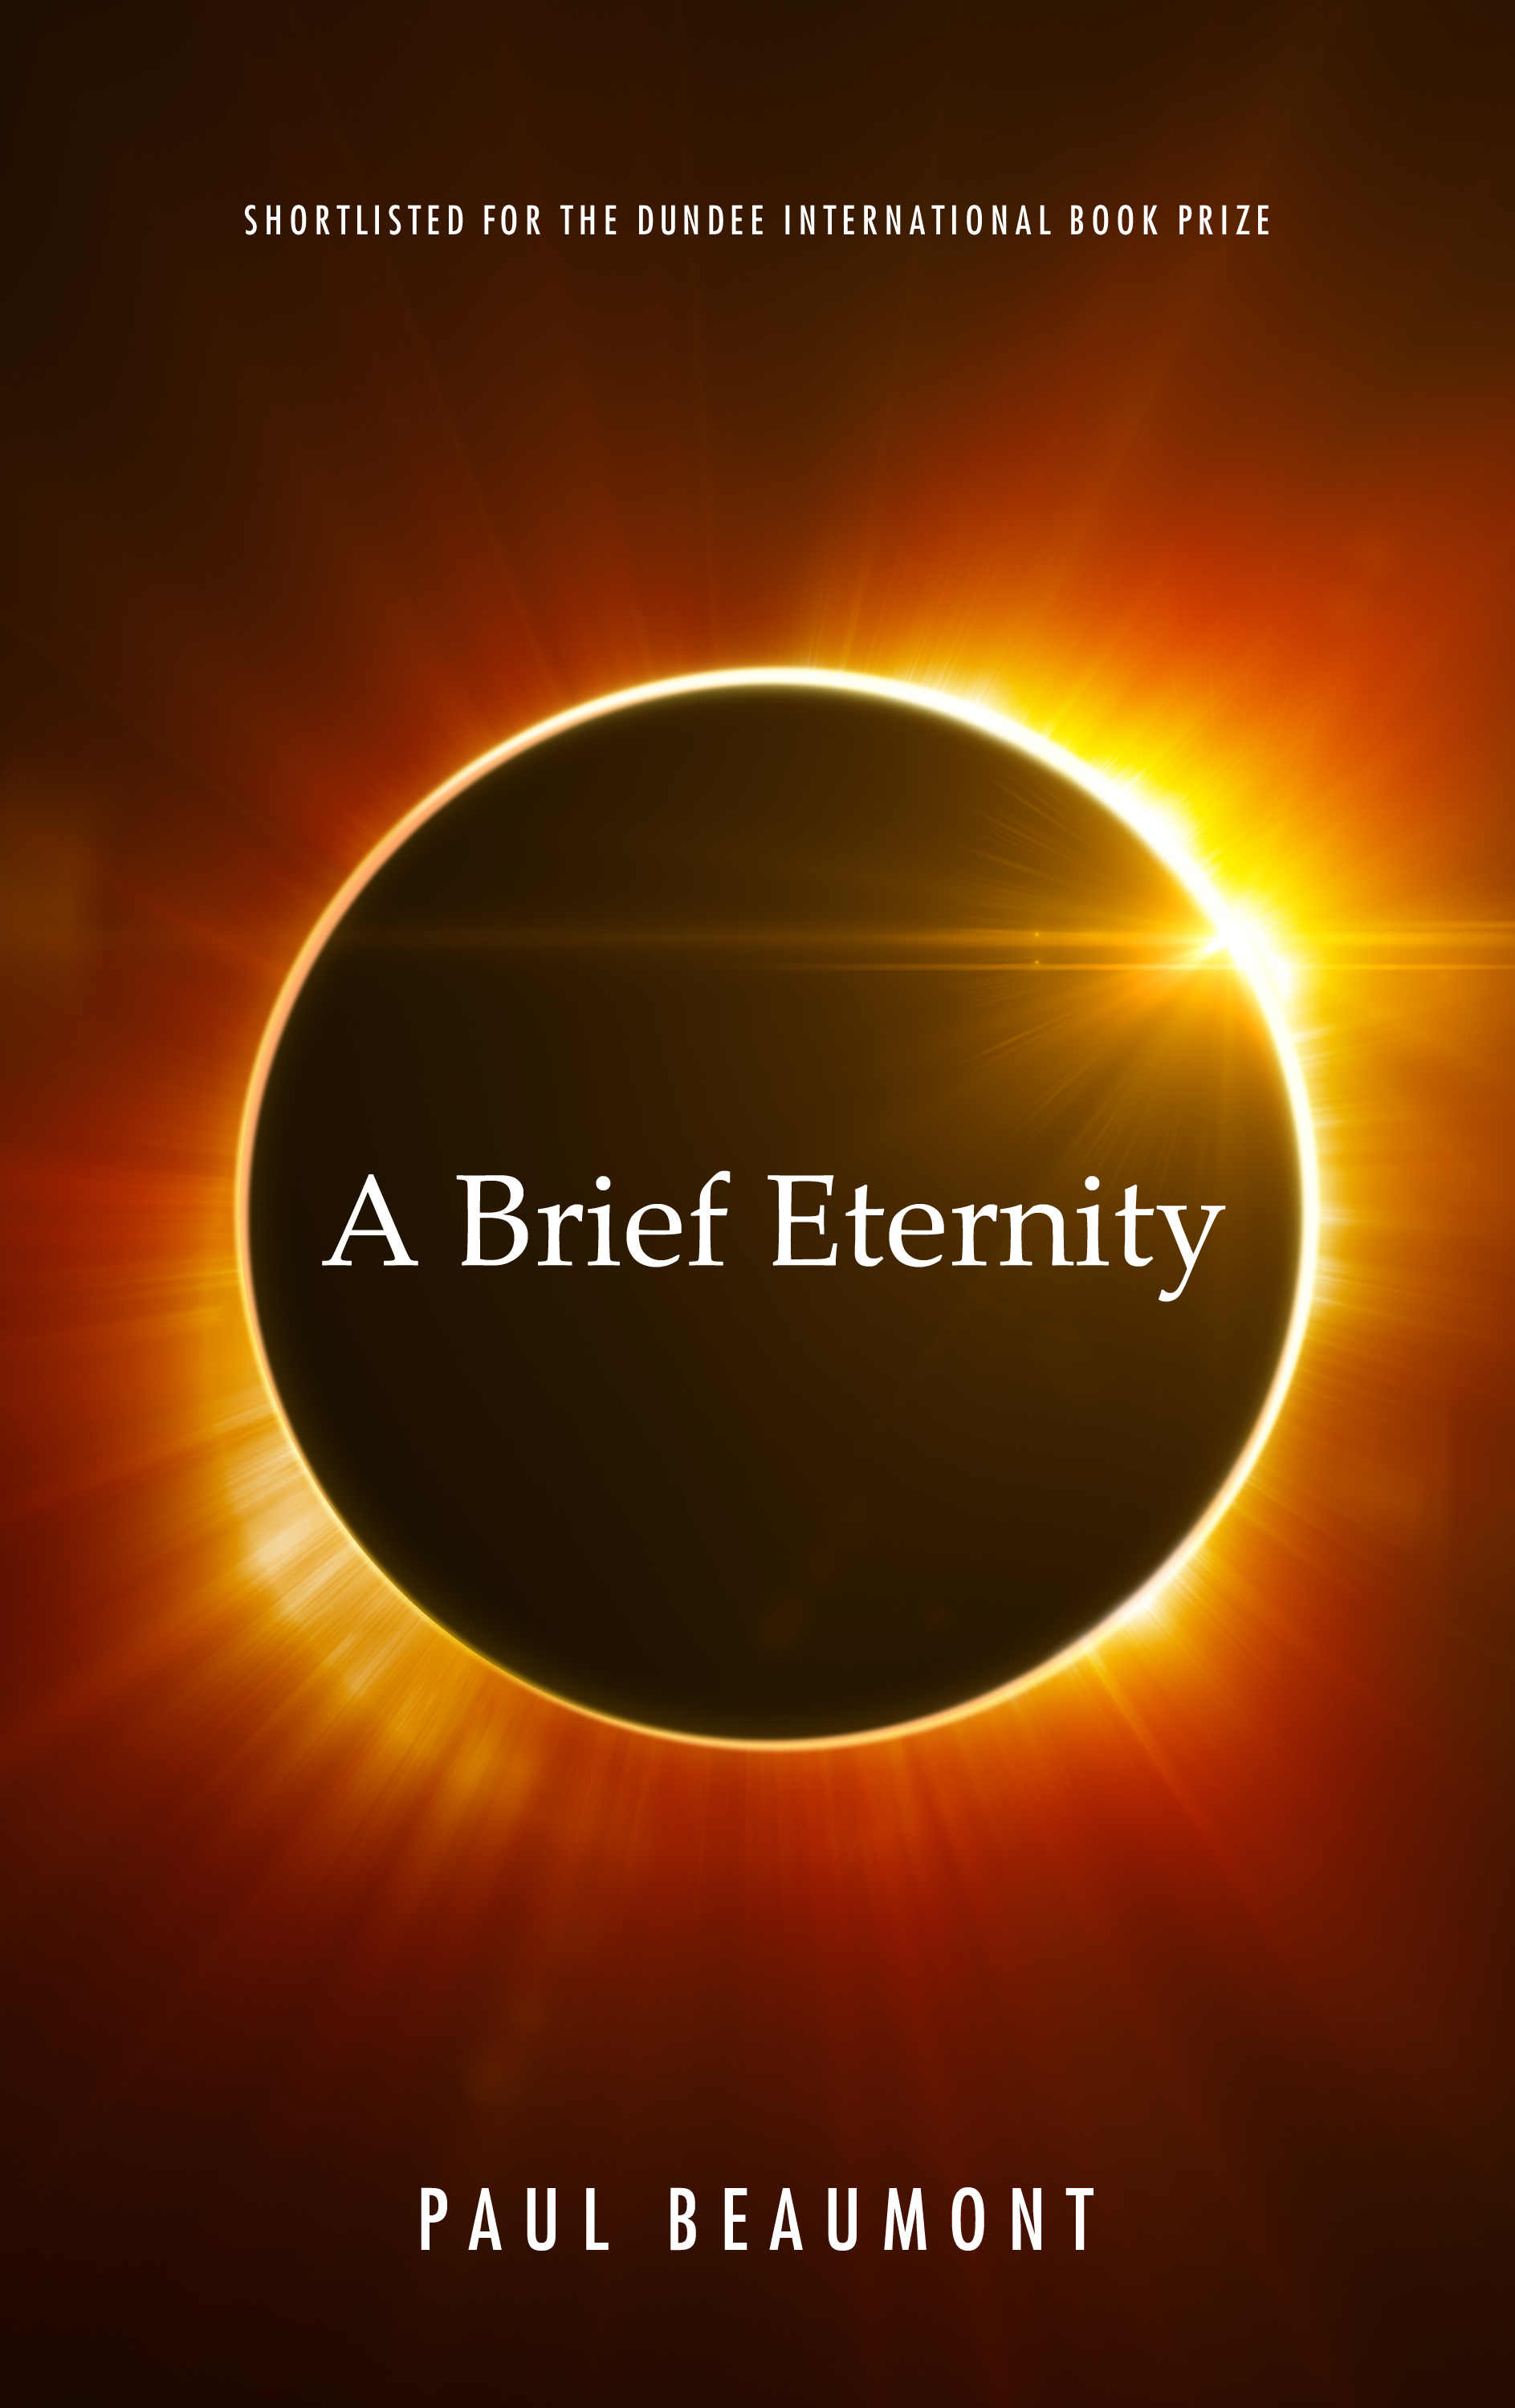 A Brief Eternity by Paul Beaumont